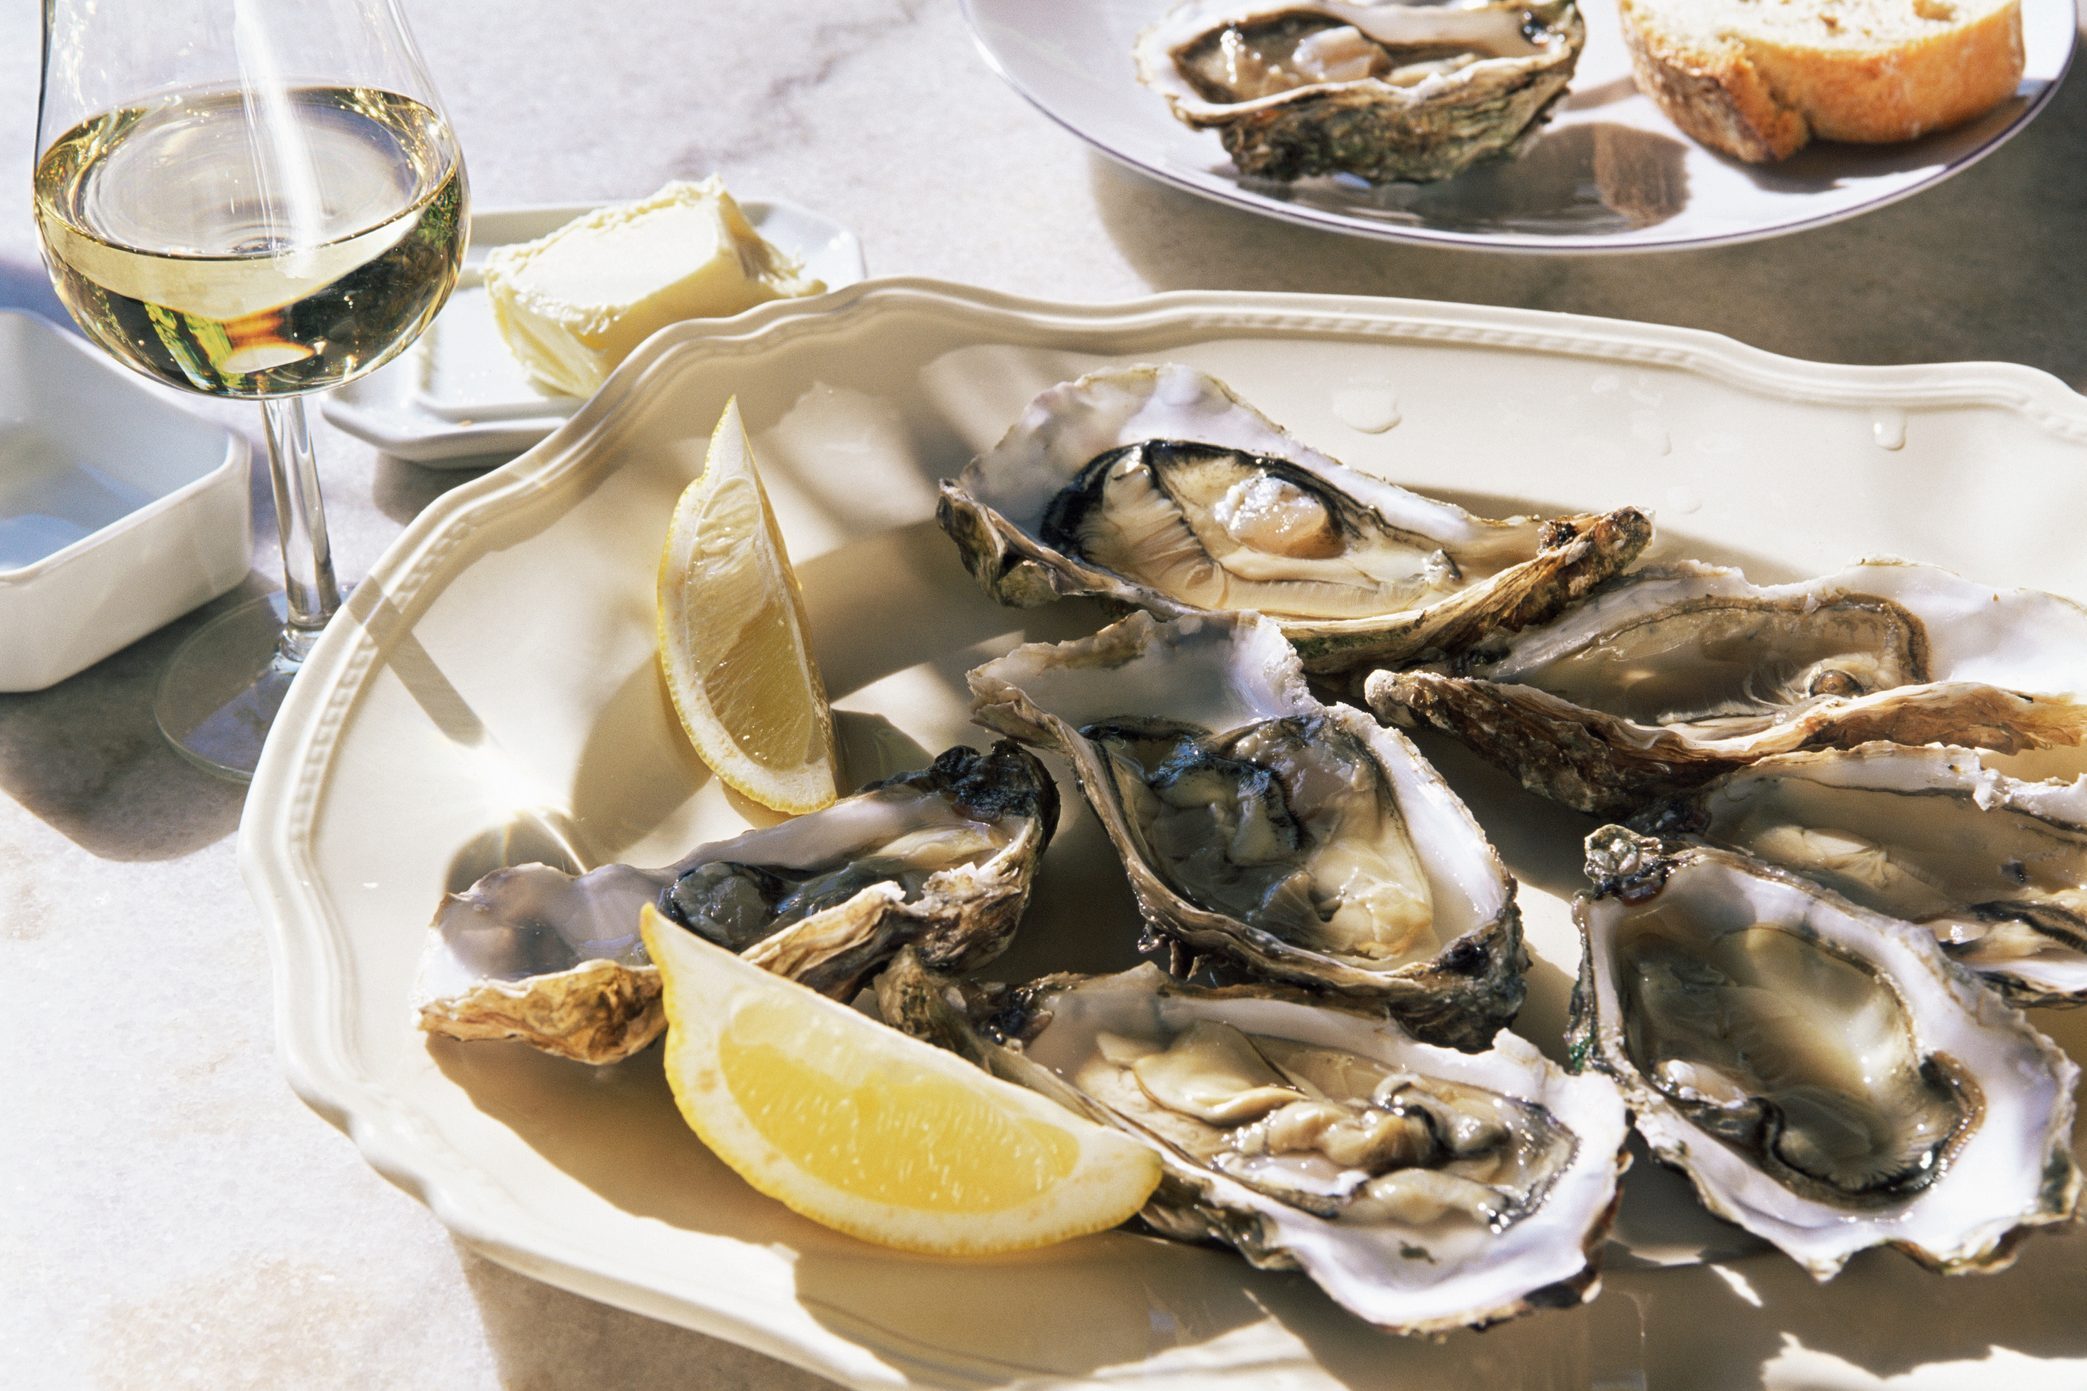 A plate of oysters with chardonnay wine